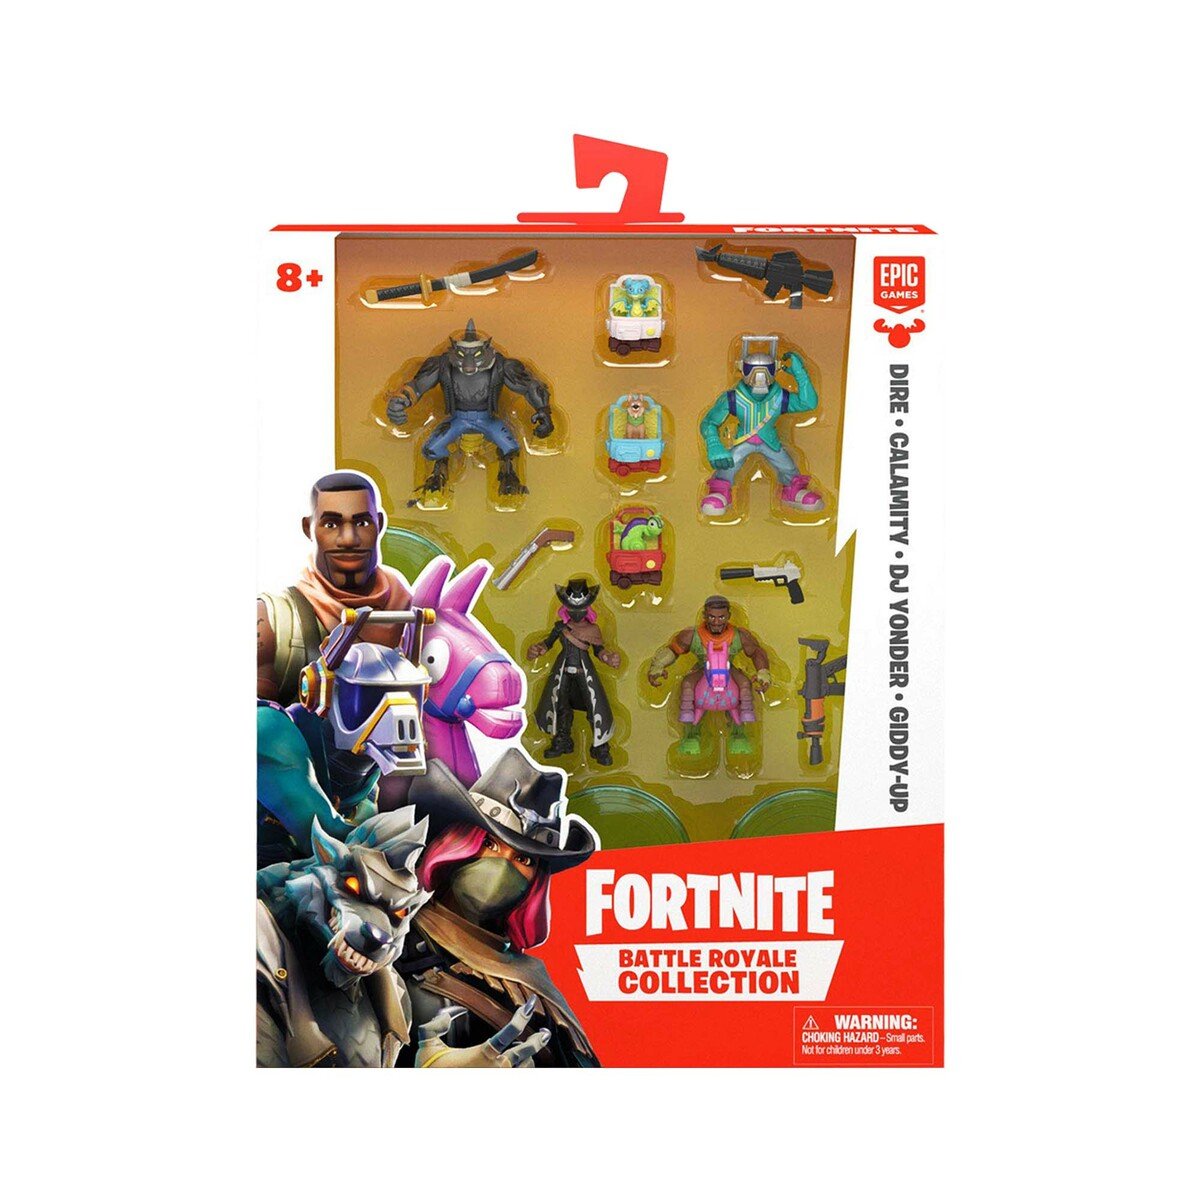 Fortnite Battle Royale Collection Dire Calamity DJ Yonder & Giddy-up 2in Minis 63520